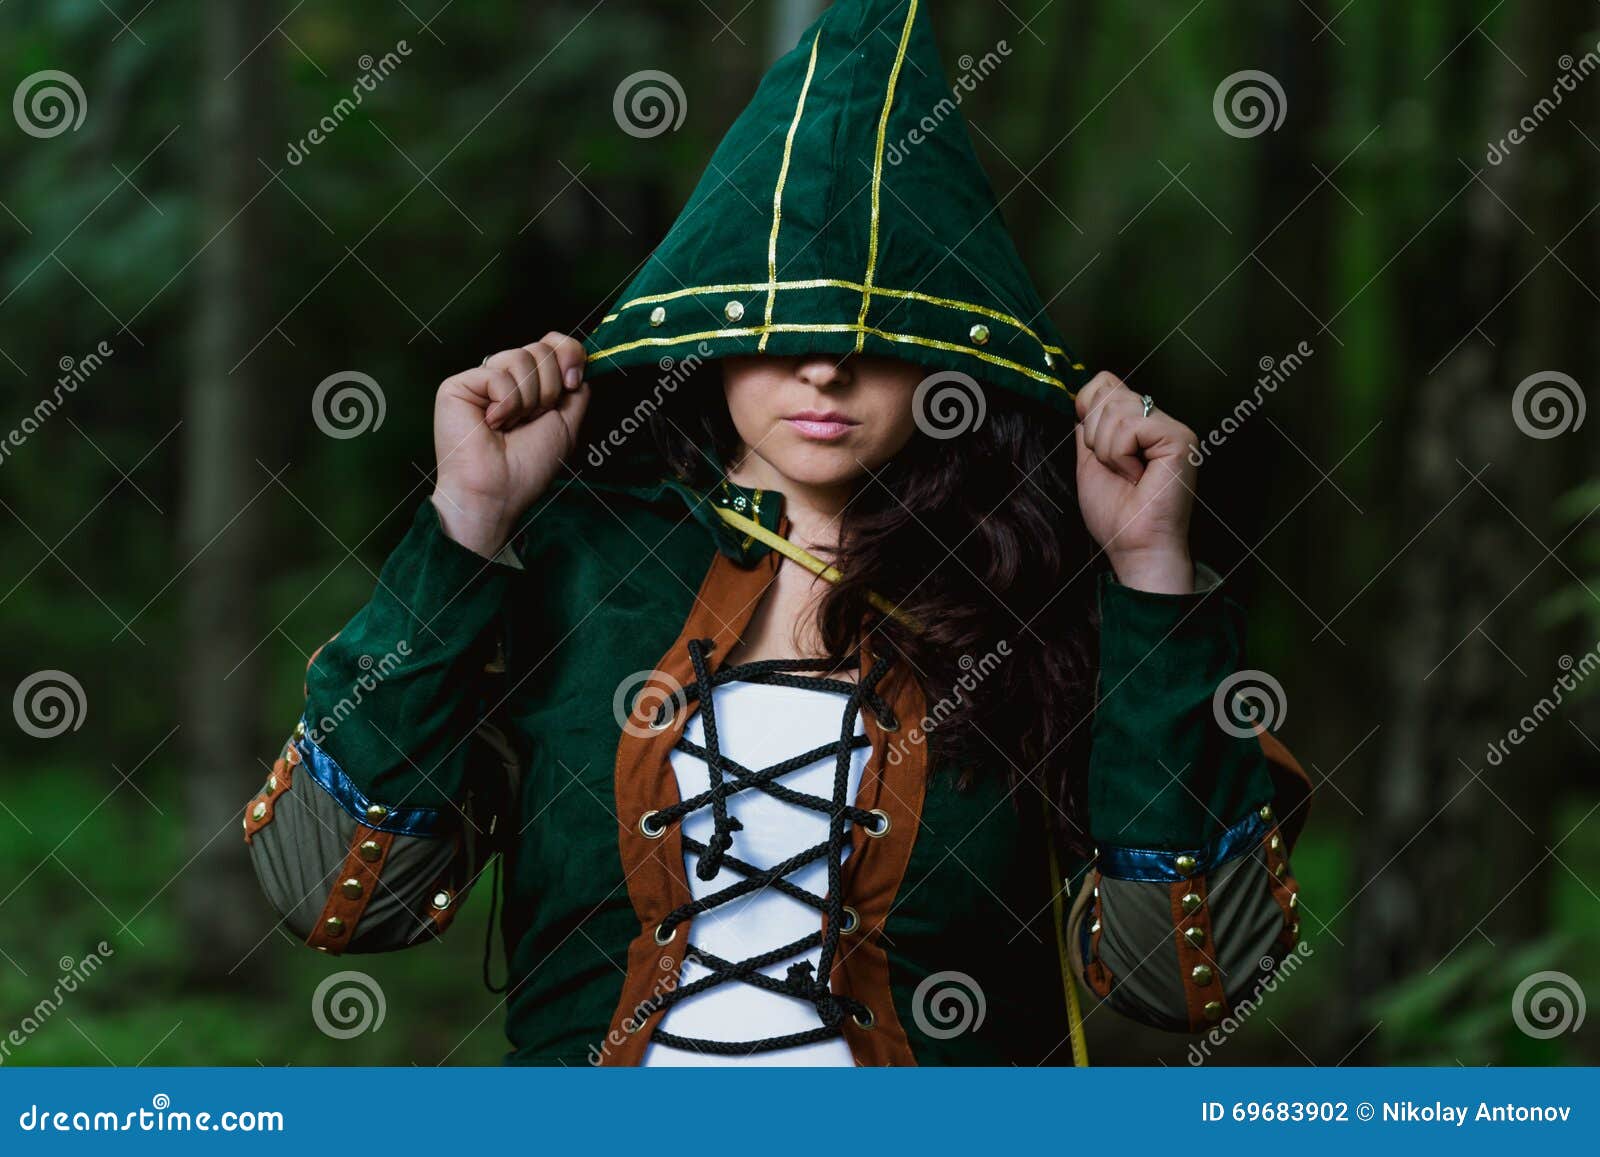 staging photo of beautiful woman in fantasy suit with hood